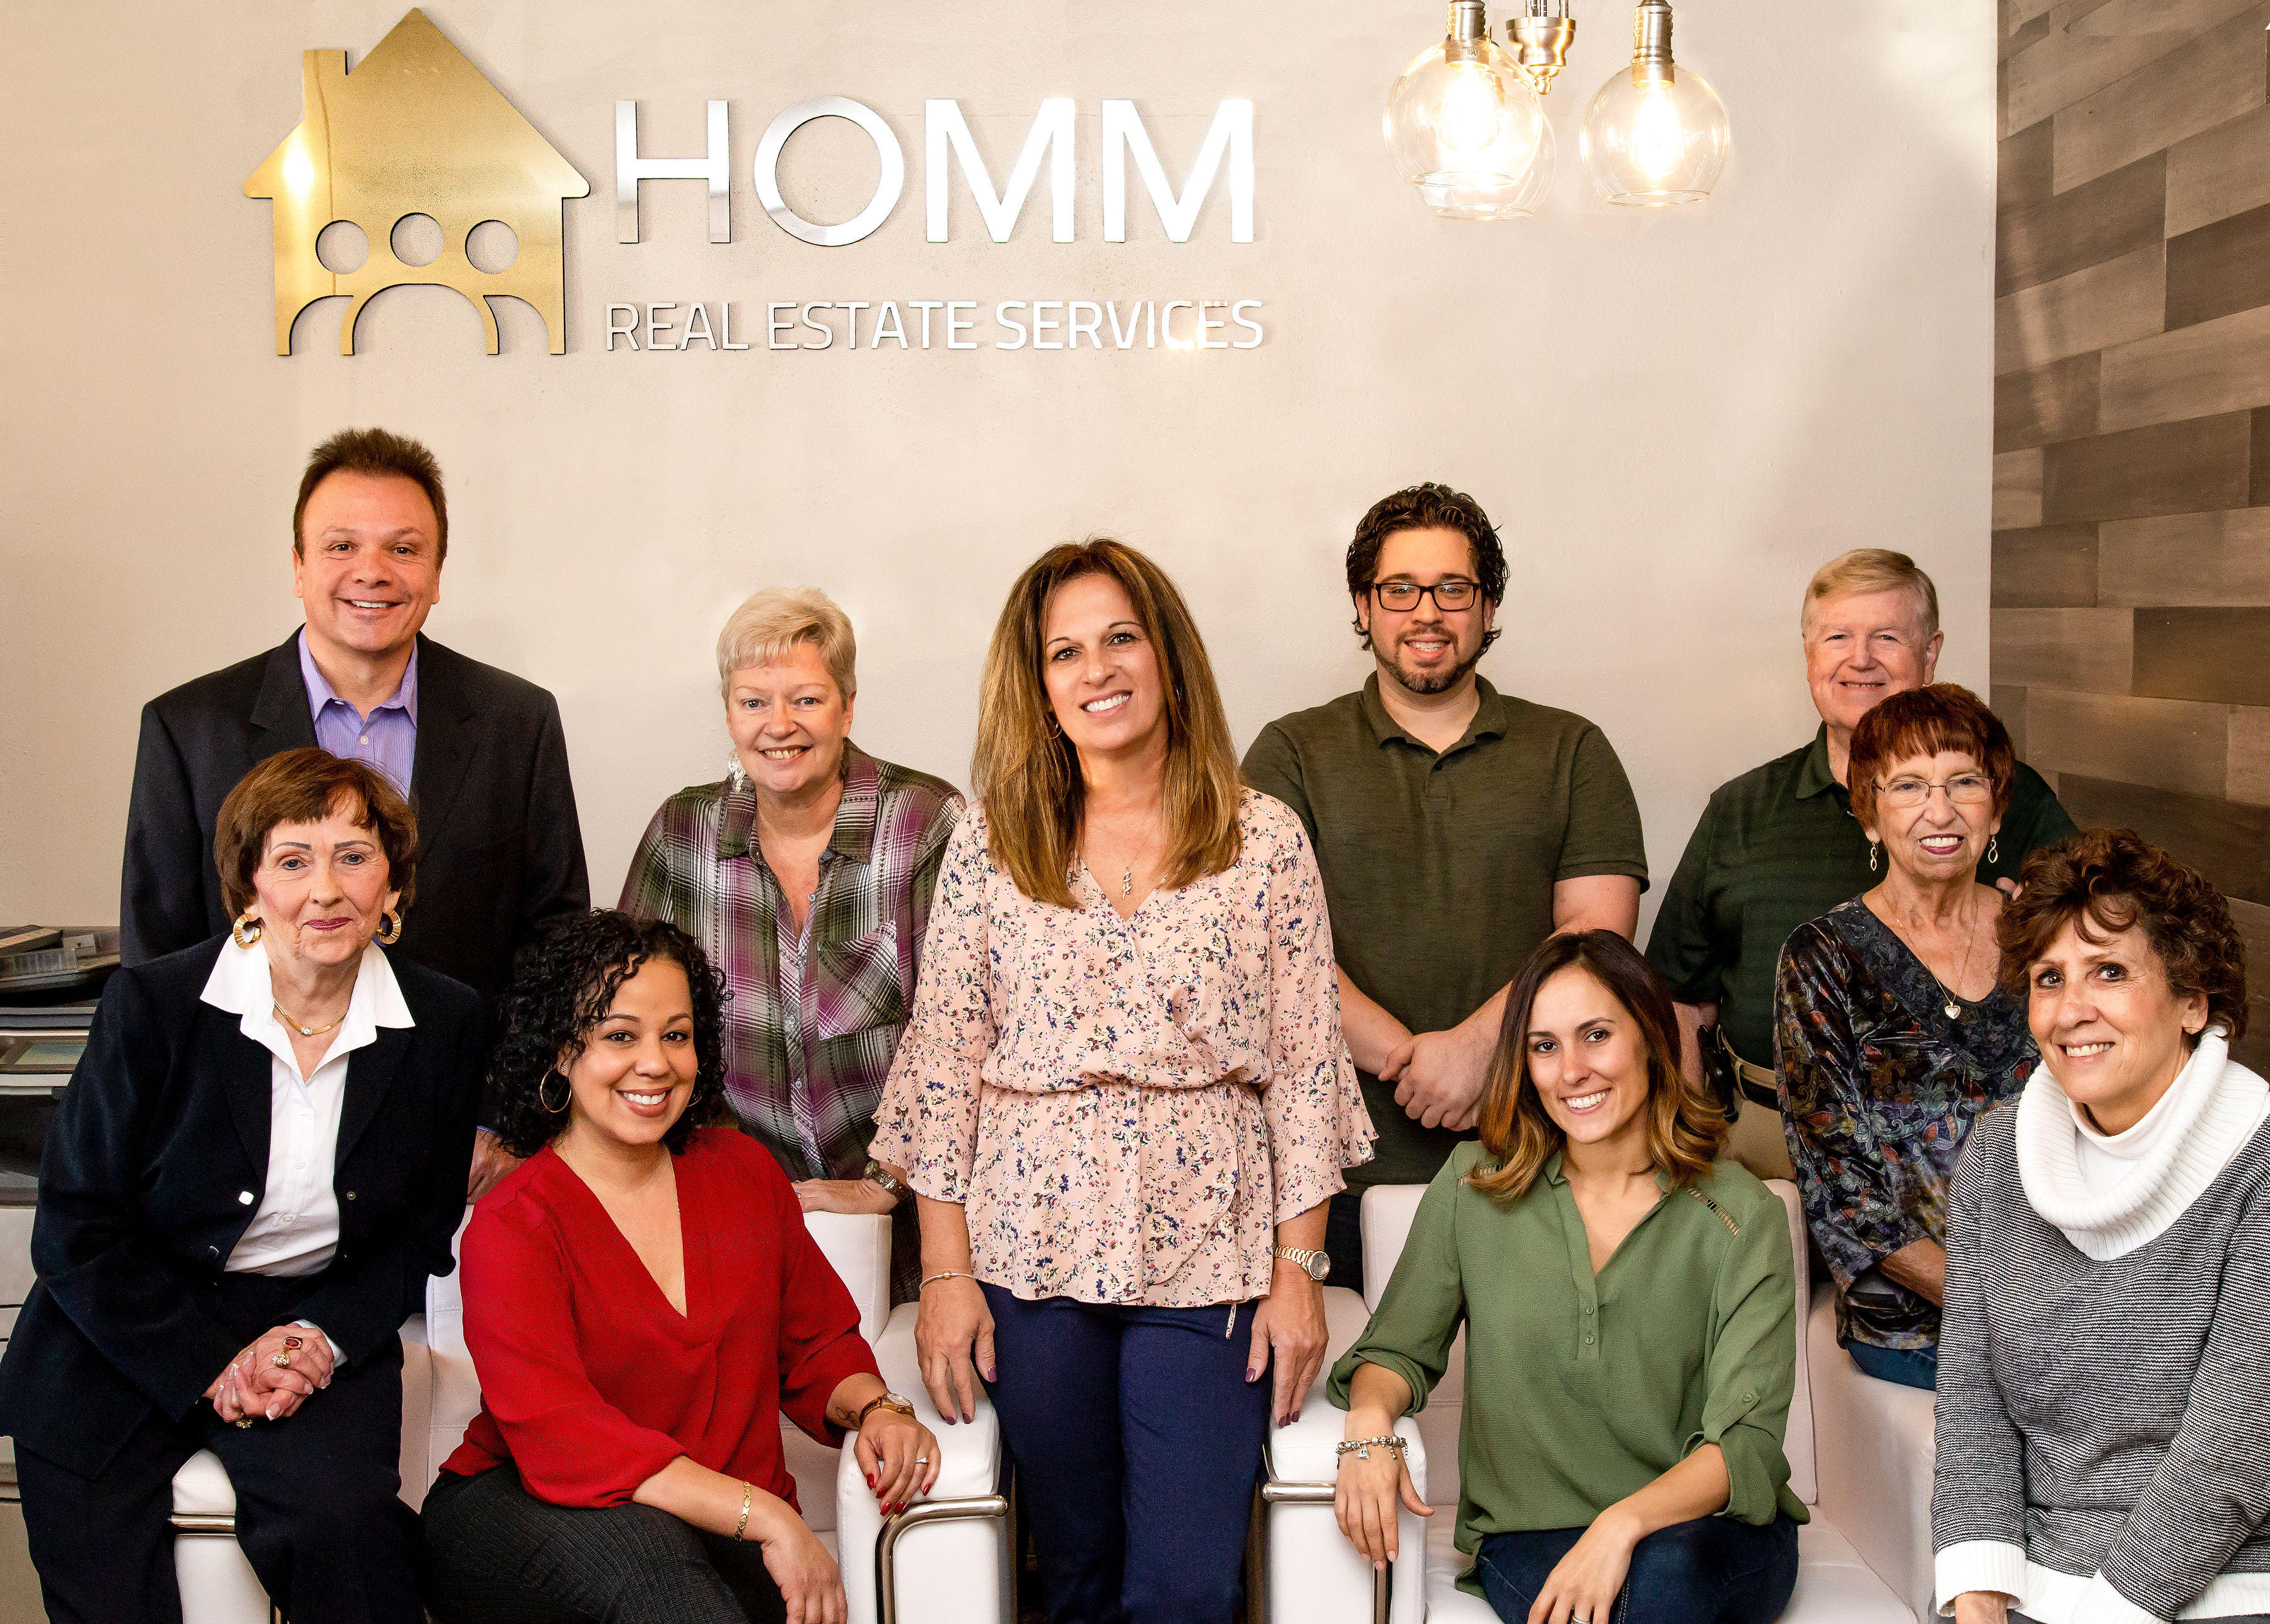 HOMM Real Estate Services Photo